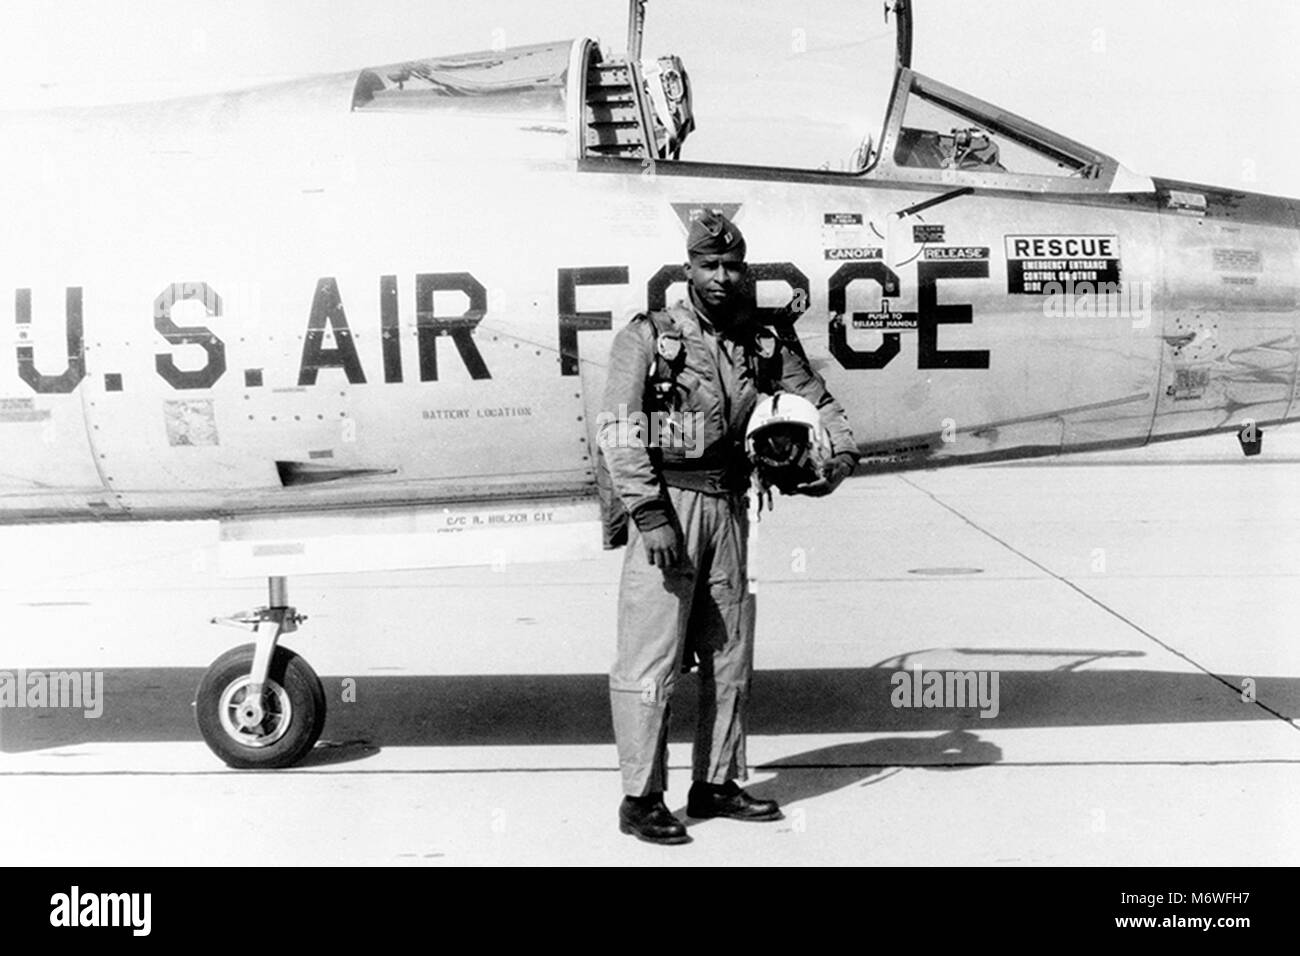 Robert Lawrence, Robert Henry Lawrence Jr. (1935 - 1967), (Major, USAF), United States Air Force Officer e il primo astronauta afro-americano Foto Stock